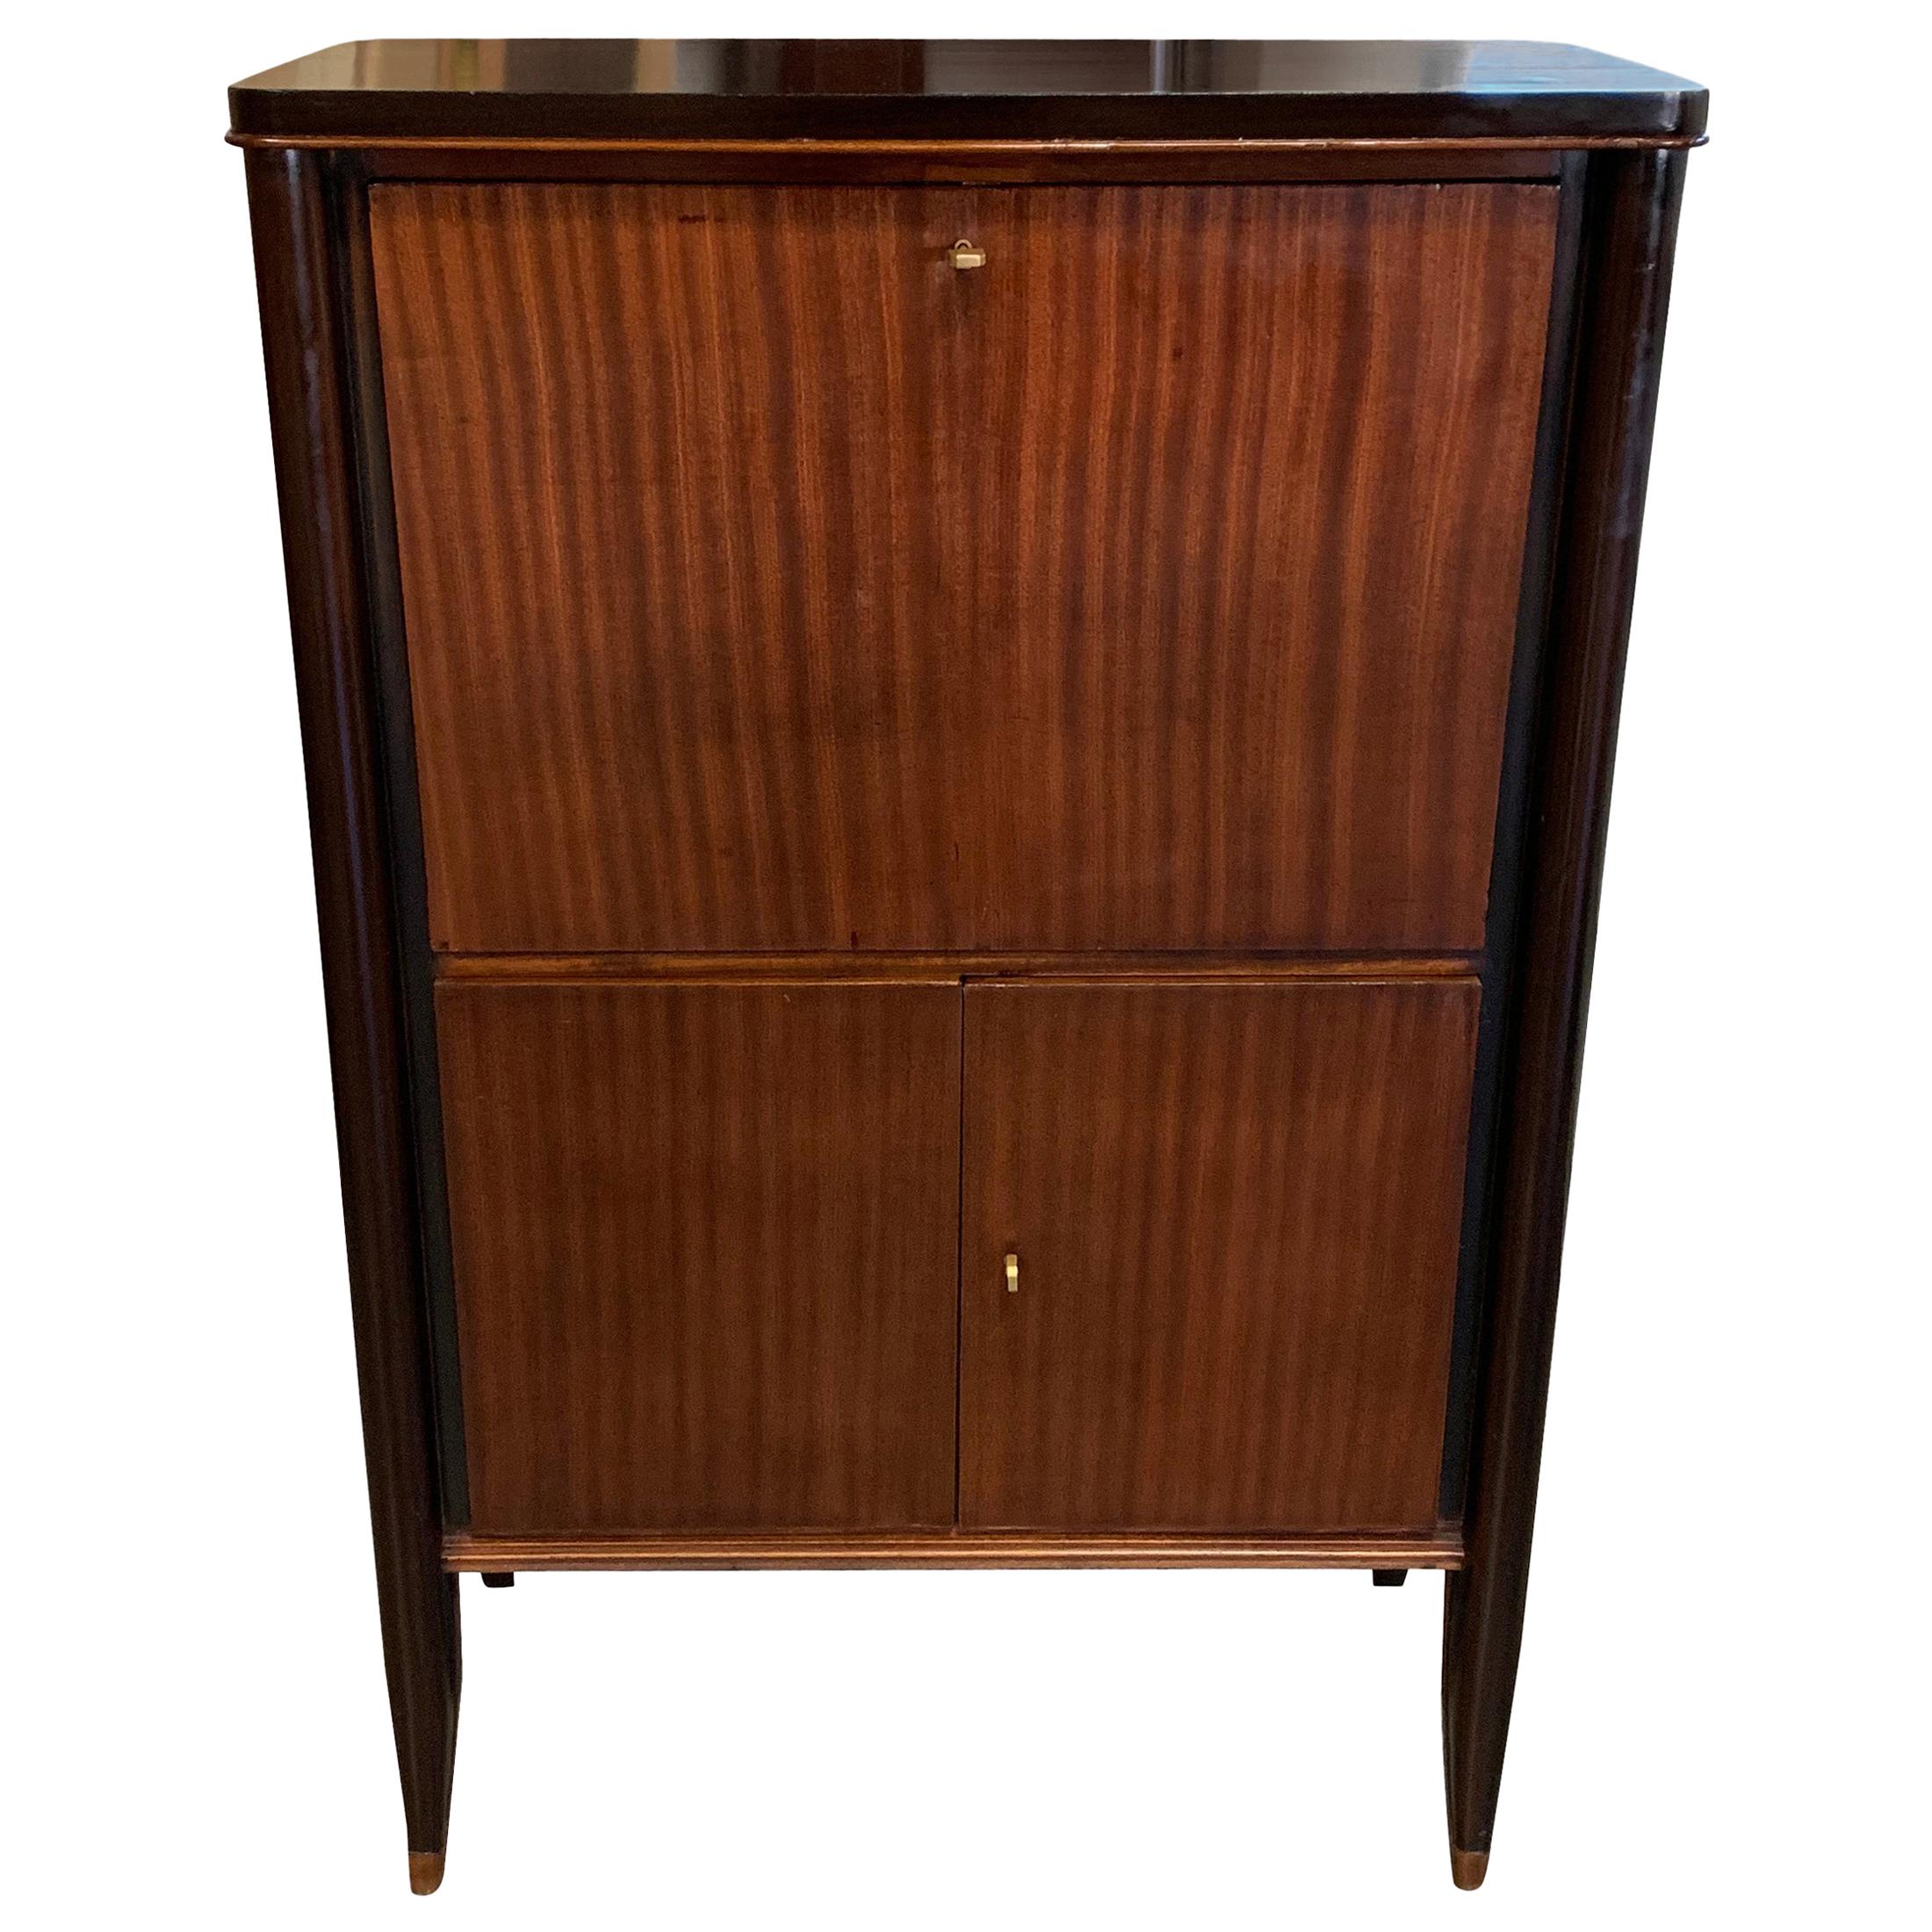 1940s French high polished palisander exterior with ebonized trim fold down desk.
Upper cabinet interior with shelves and small door with interior compartment.
Bottom two doors with interior shelves.
 